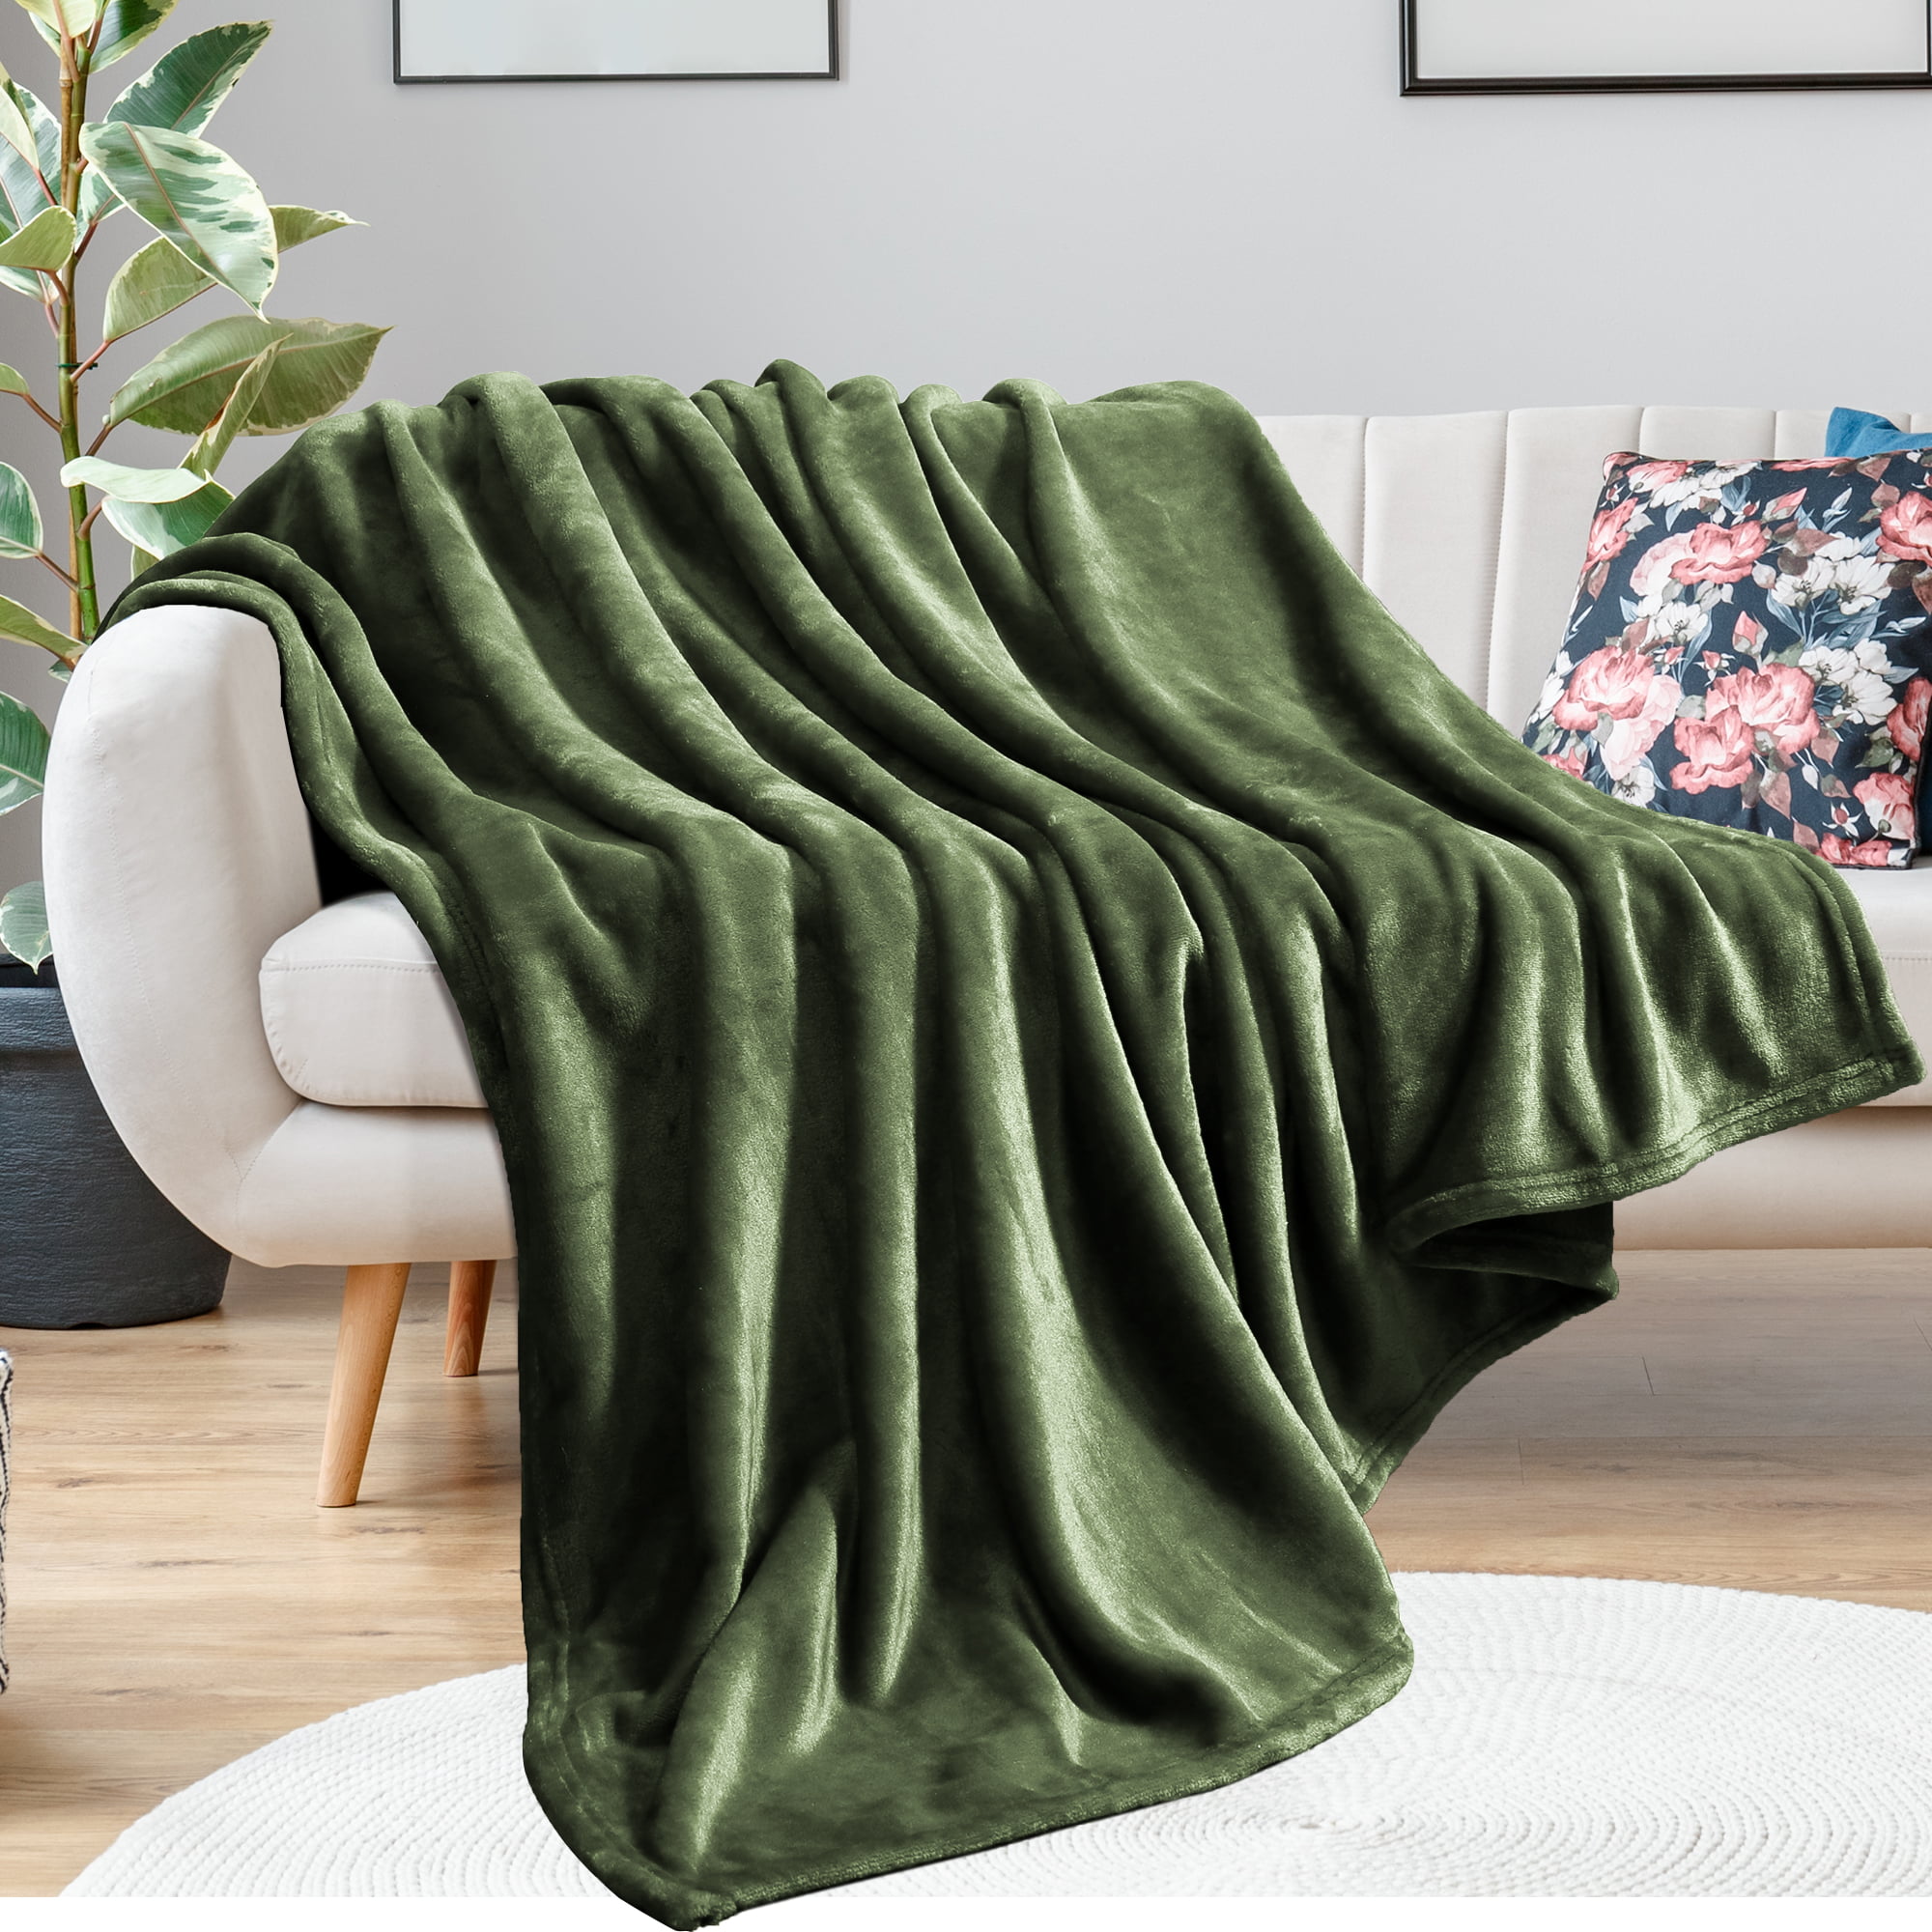 Soft Flannel Fuzzy Blanket Parrot Flower Palm Leaf Fleece Throw Blankets Sofa Throw Blanket for Couch 50x60 Inches Bed Warm Blankets for Winter